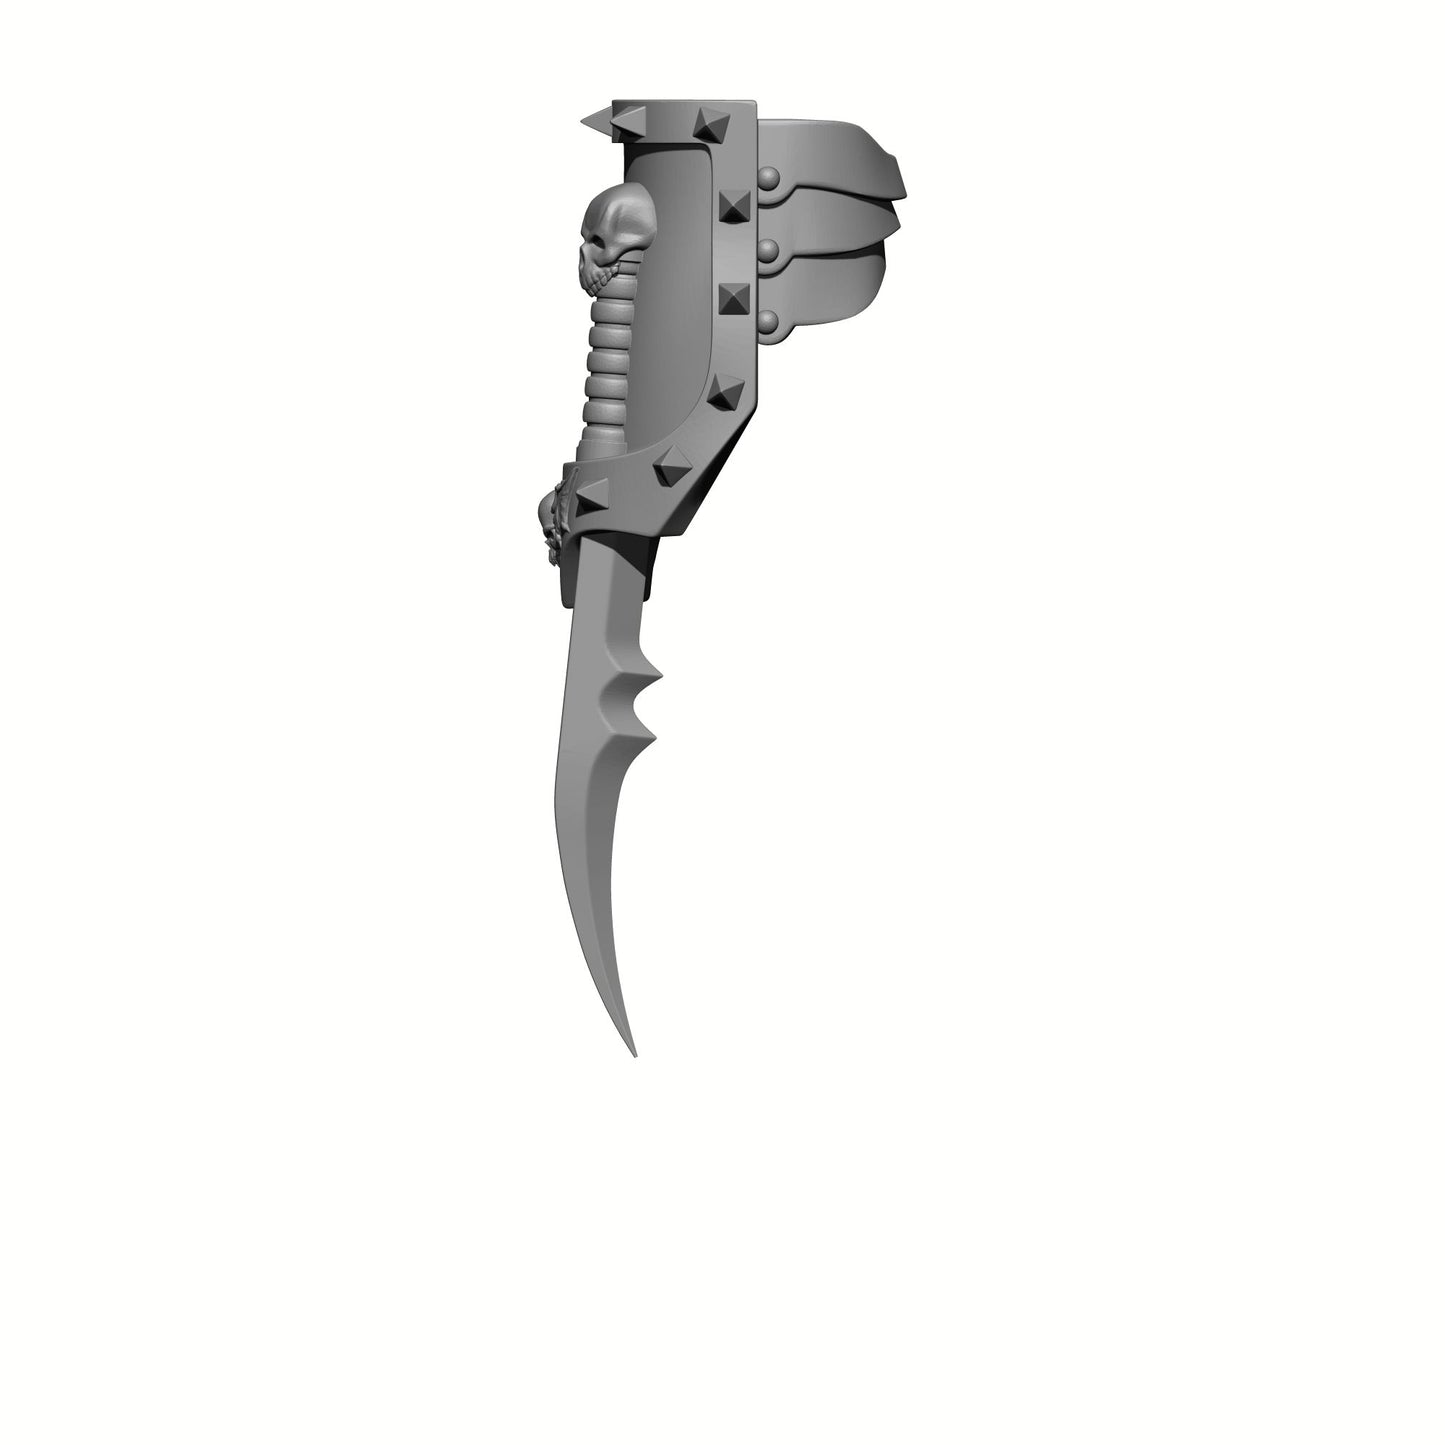 Konrad Curze Night Terrors Legion Lightning Claws - Plain Compatible with McFarlane Toys Space Marines 1:12th Scale Action Figures Left Angle